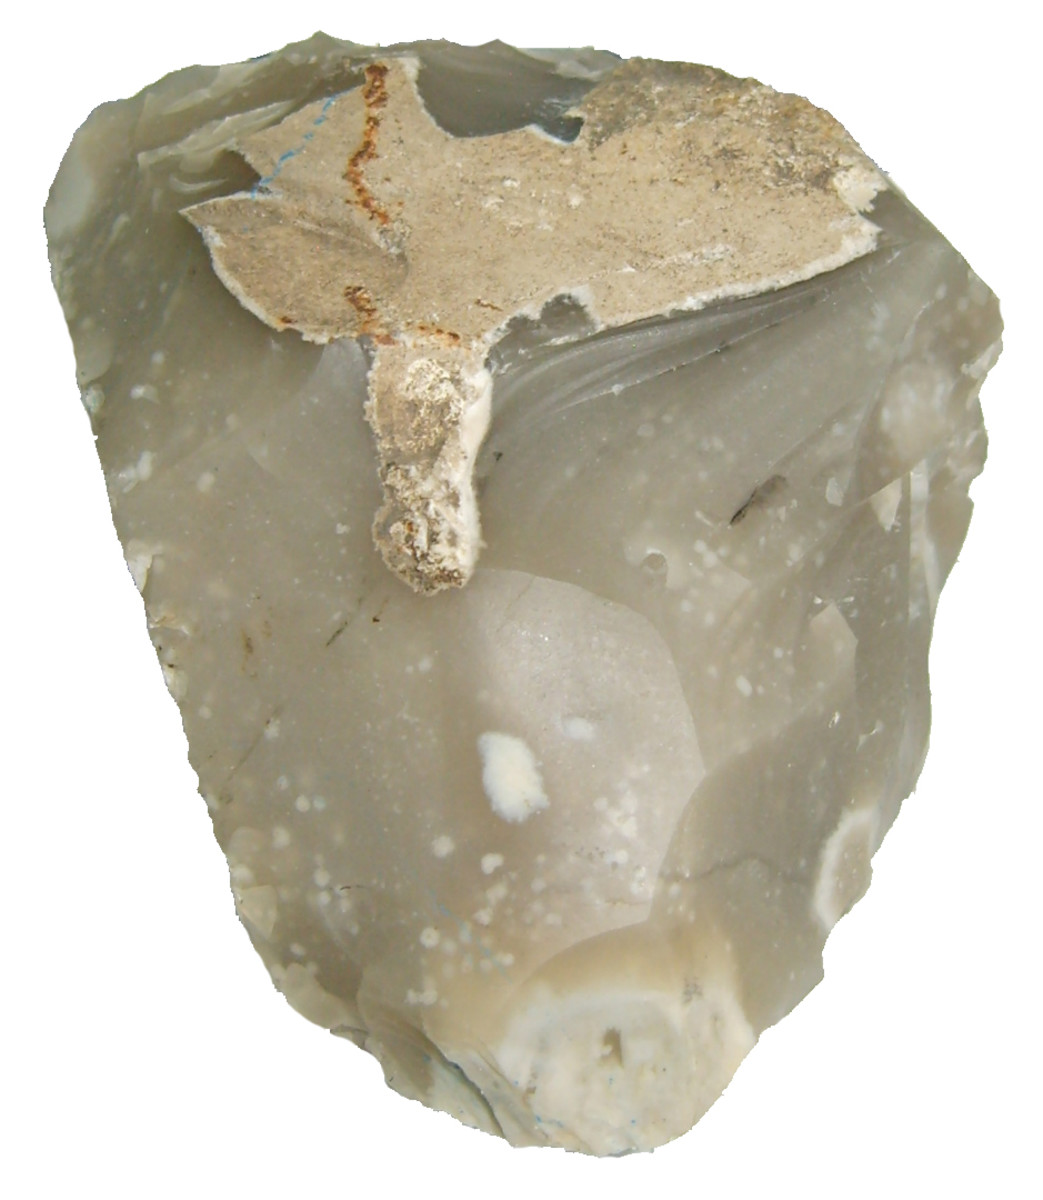 Piece of Flint, a type of quartz, found in chalk and limestone